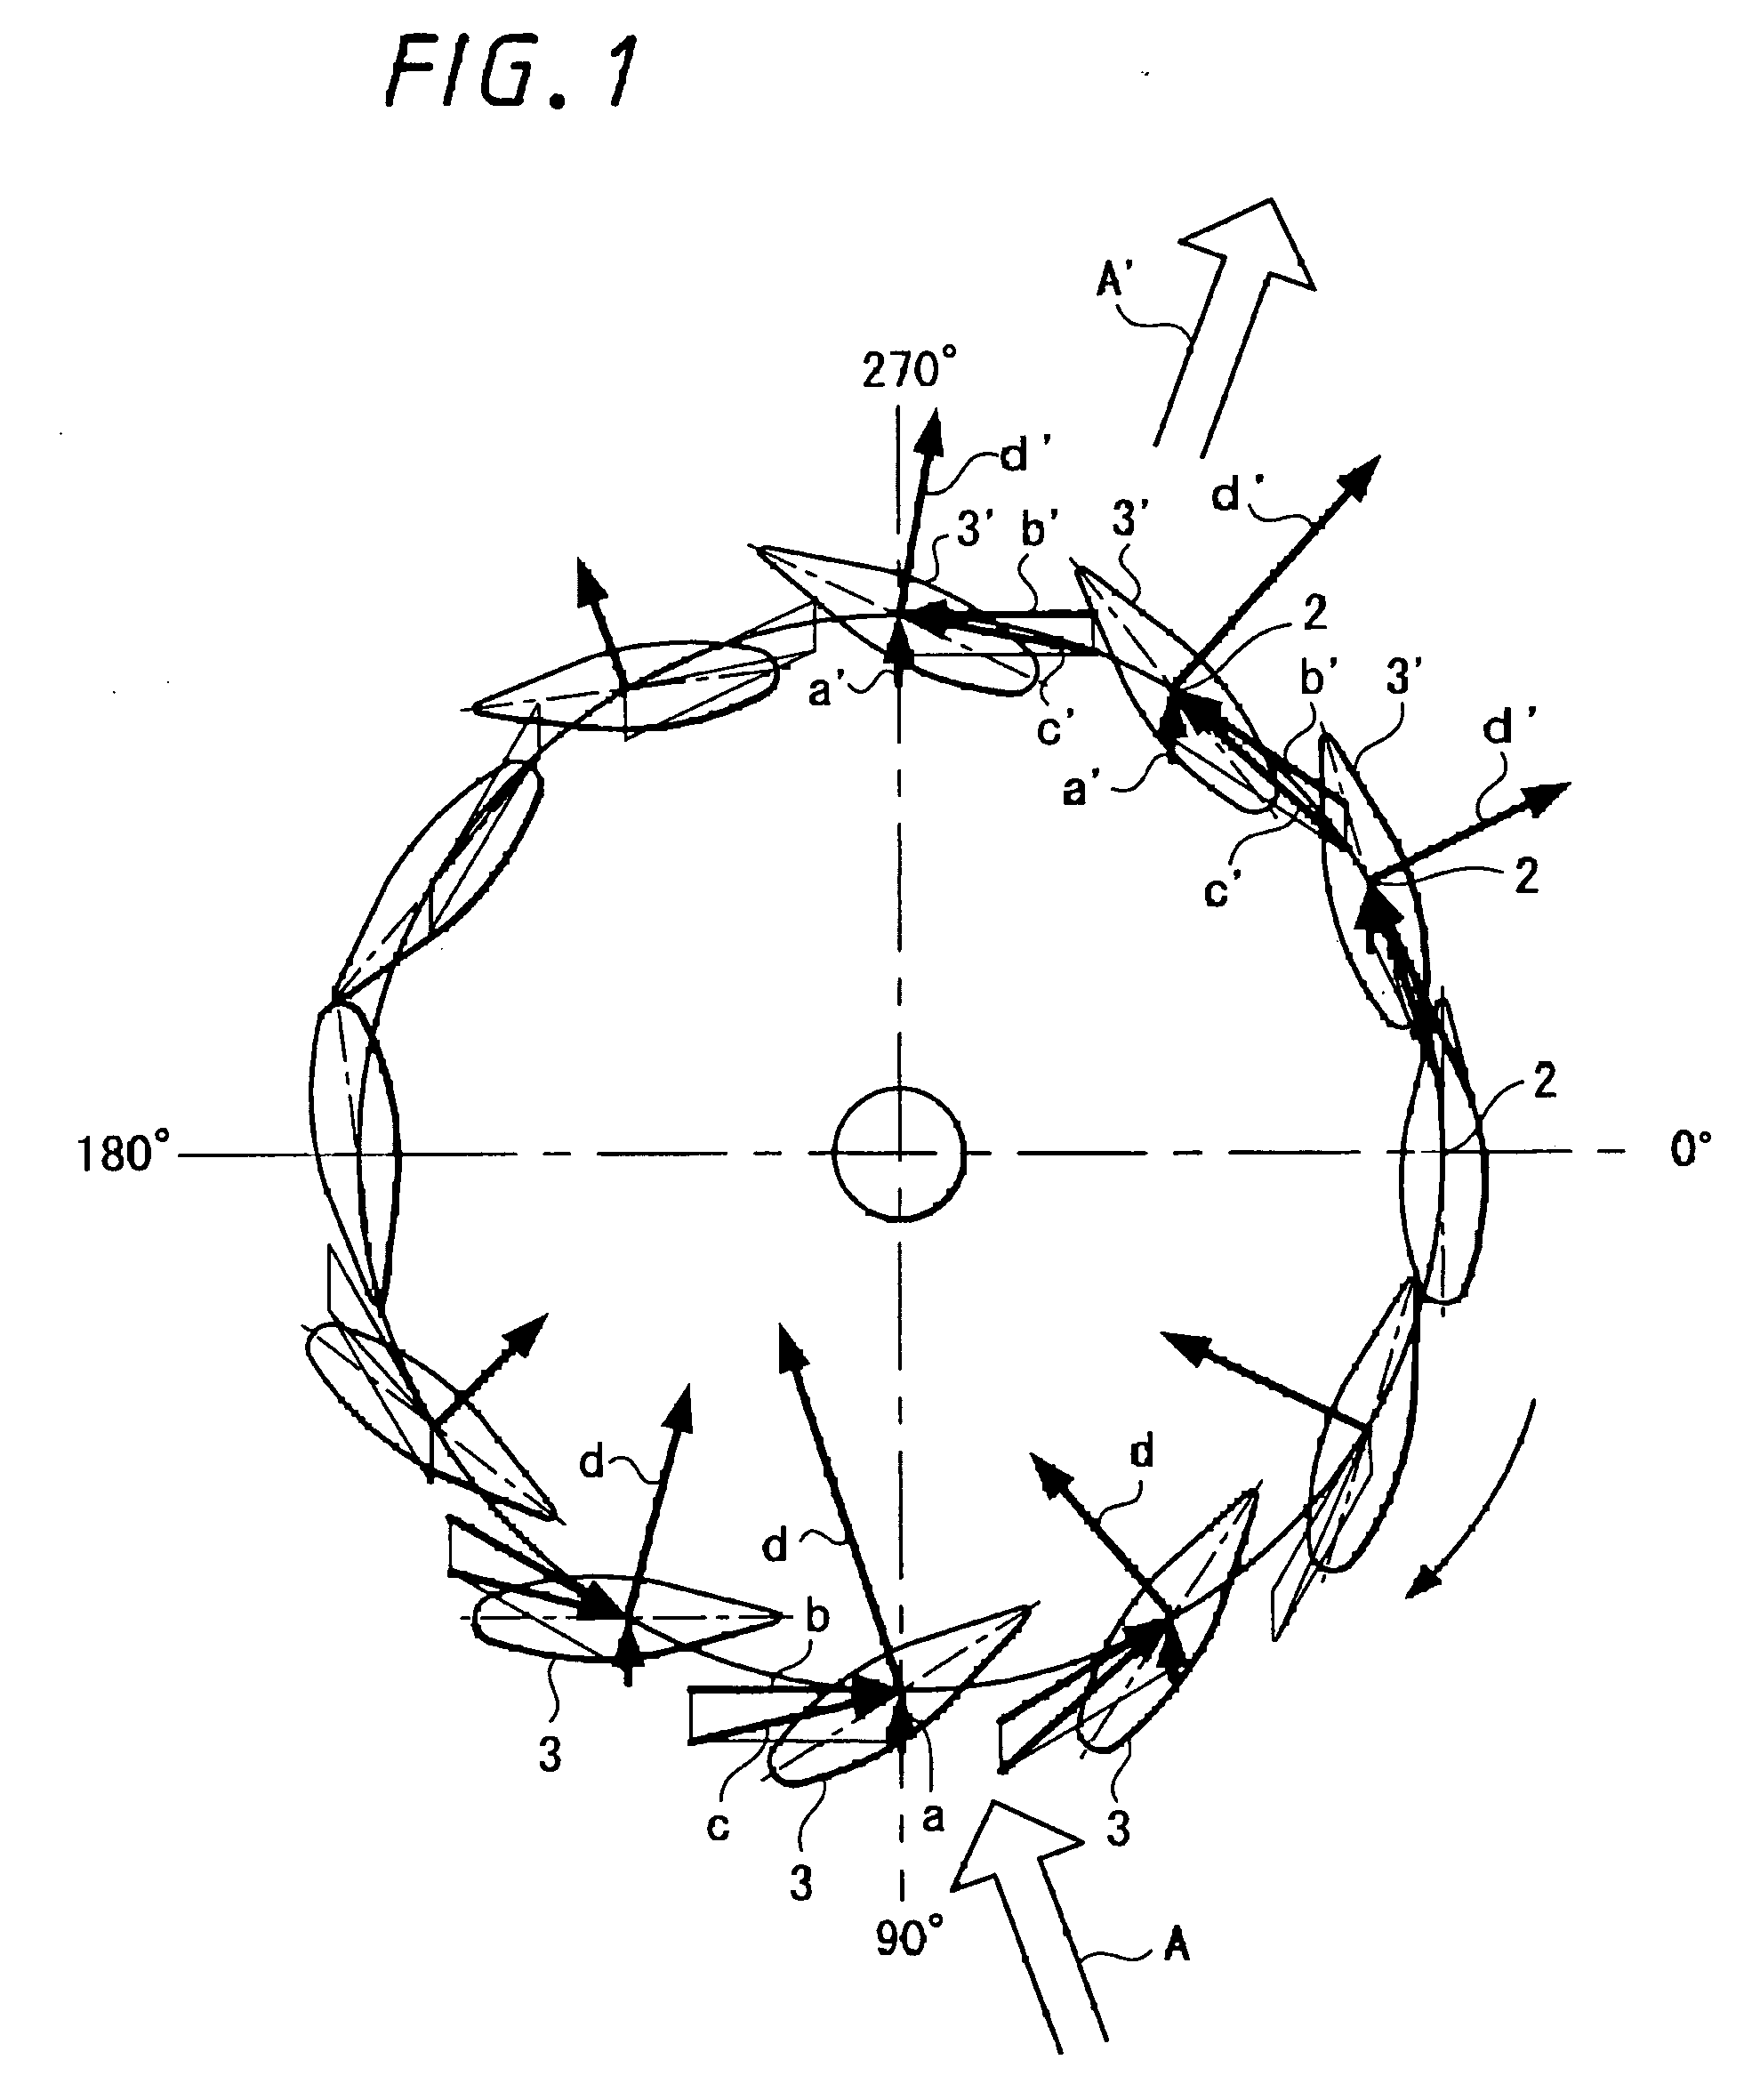 Cooling fan and image display apparatus